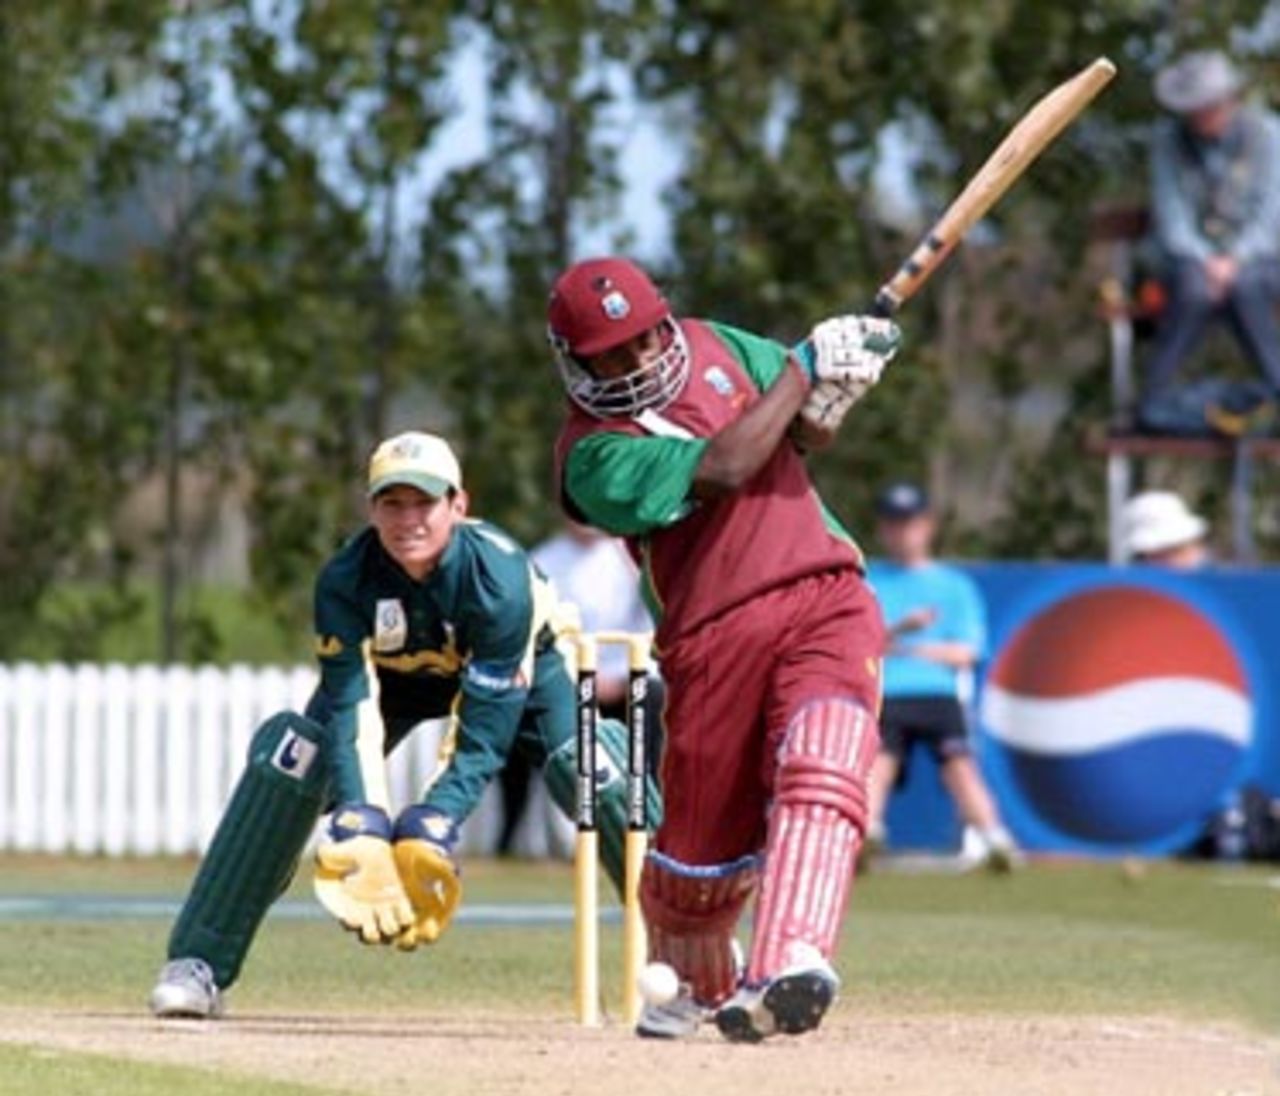 West Indies Under-19 batsman Tonito Willett hits a delivery down the ground during his innings of 83. Australia Under-19 wicket-keeper Adam Crosthwaite looks on. 2nd ICC Under-19 World Cup Super League Semi Final: Australia Under-19s v West Indies Under-19s at Bert Sutcliffe Oval, Lincoln, 6-7 February 2002 (7 February 2002).